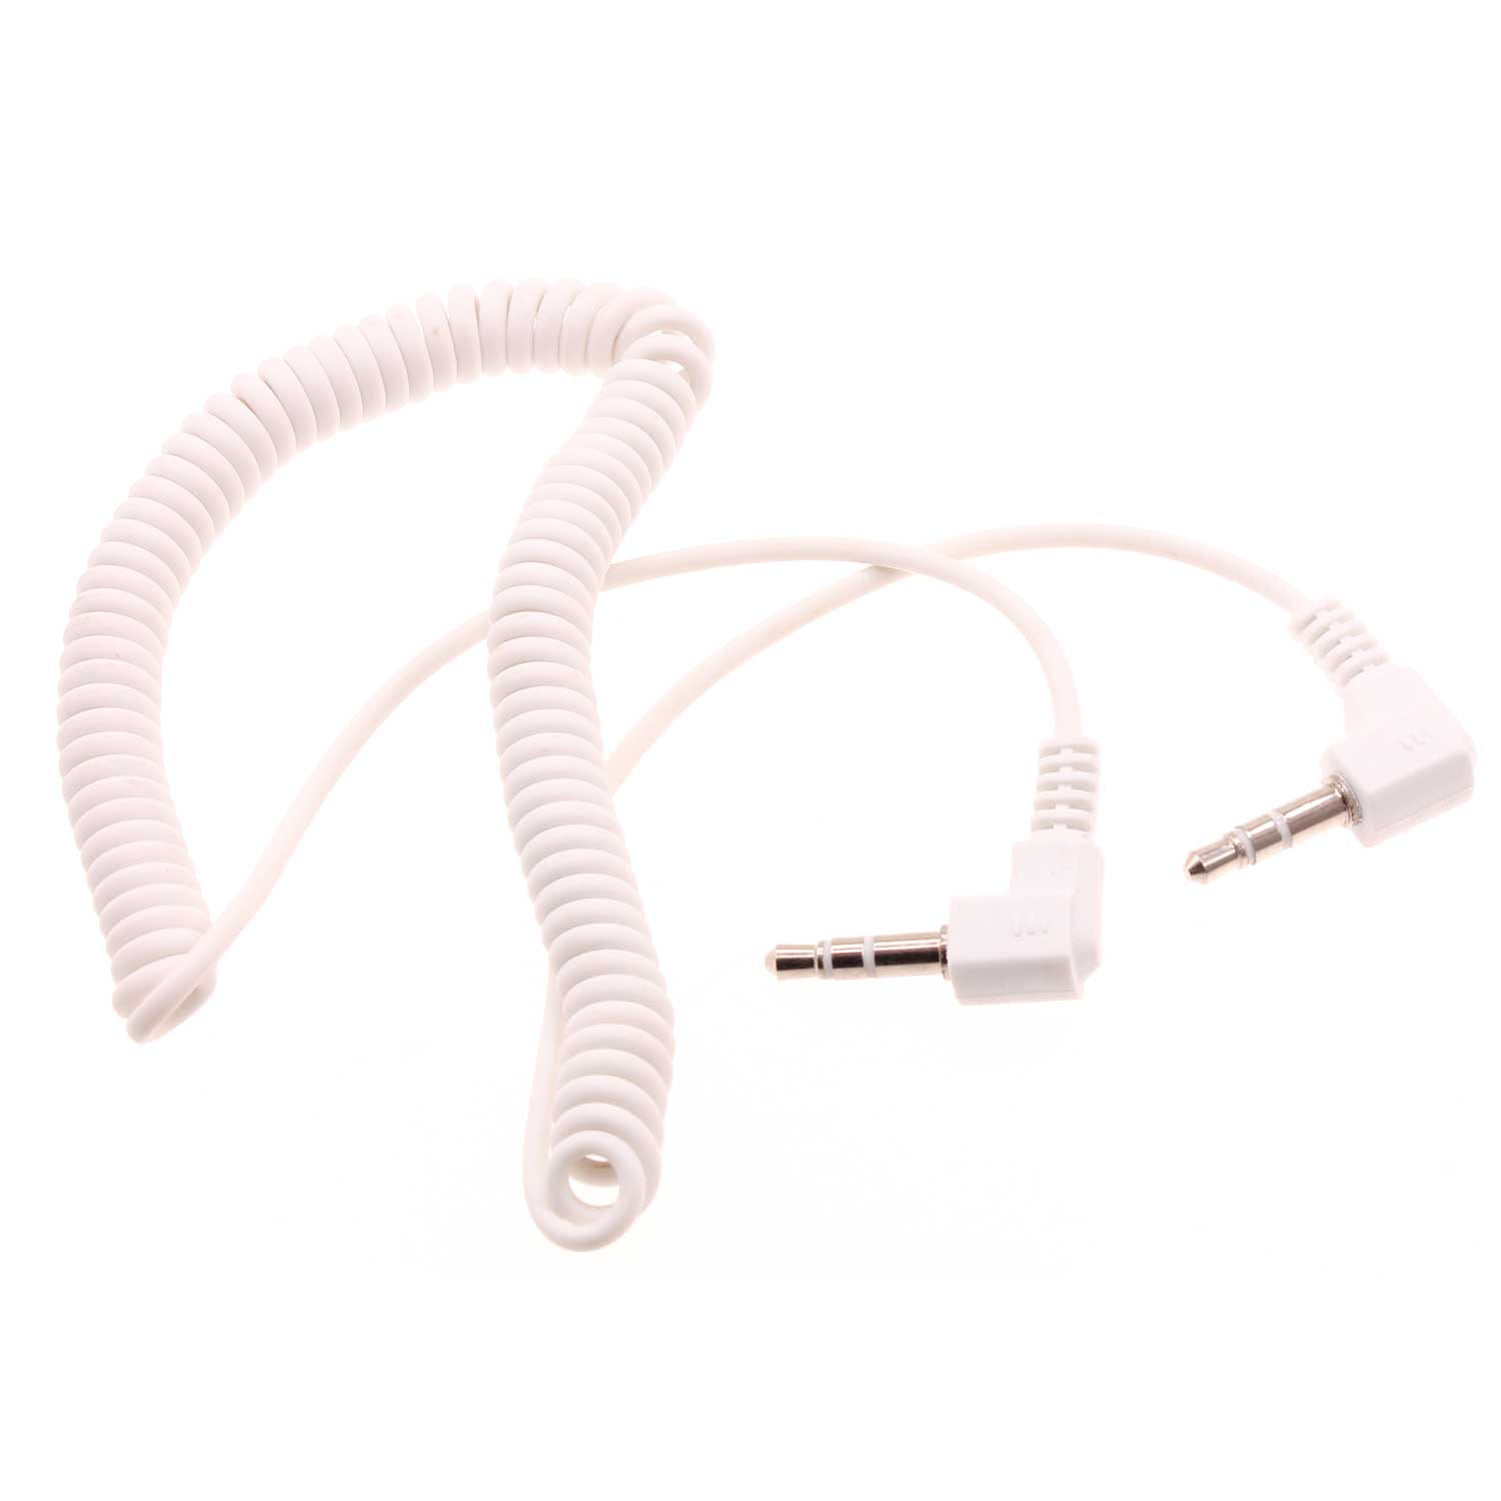 WHITE COILED AUX CABLE CAR STEREO WIRE AUDIO SPEAKER CORD For PHONE TABLET iPOD 